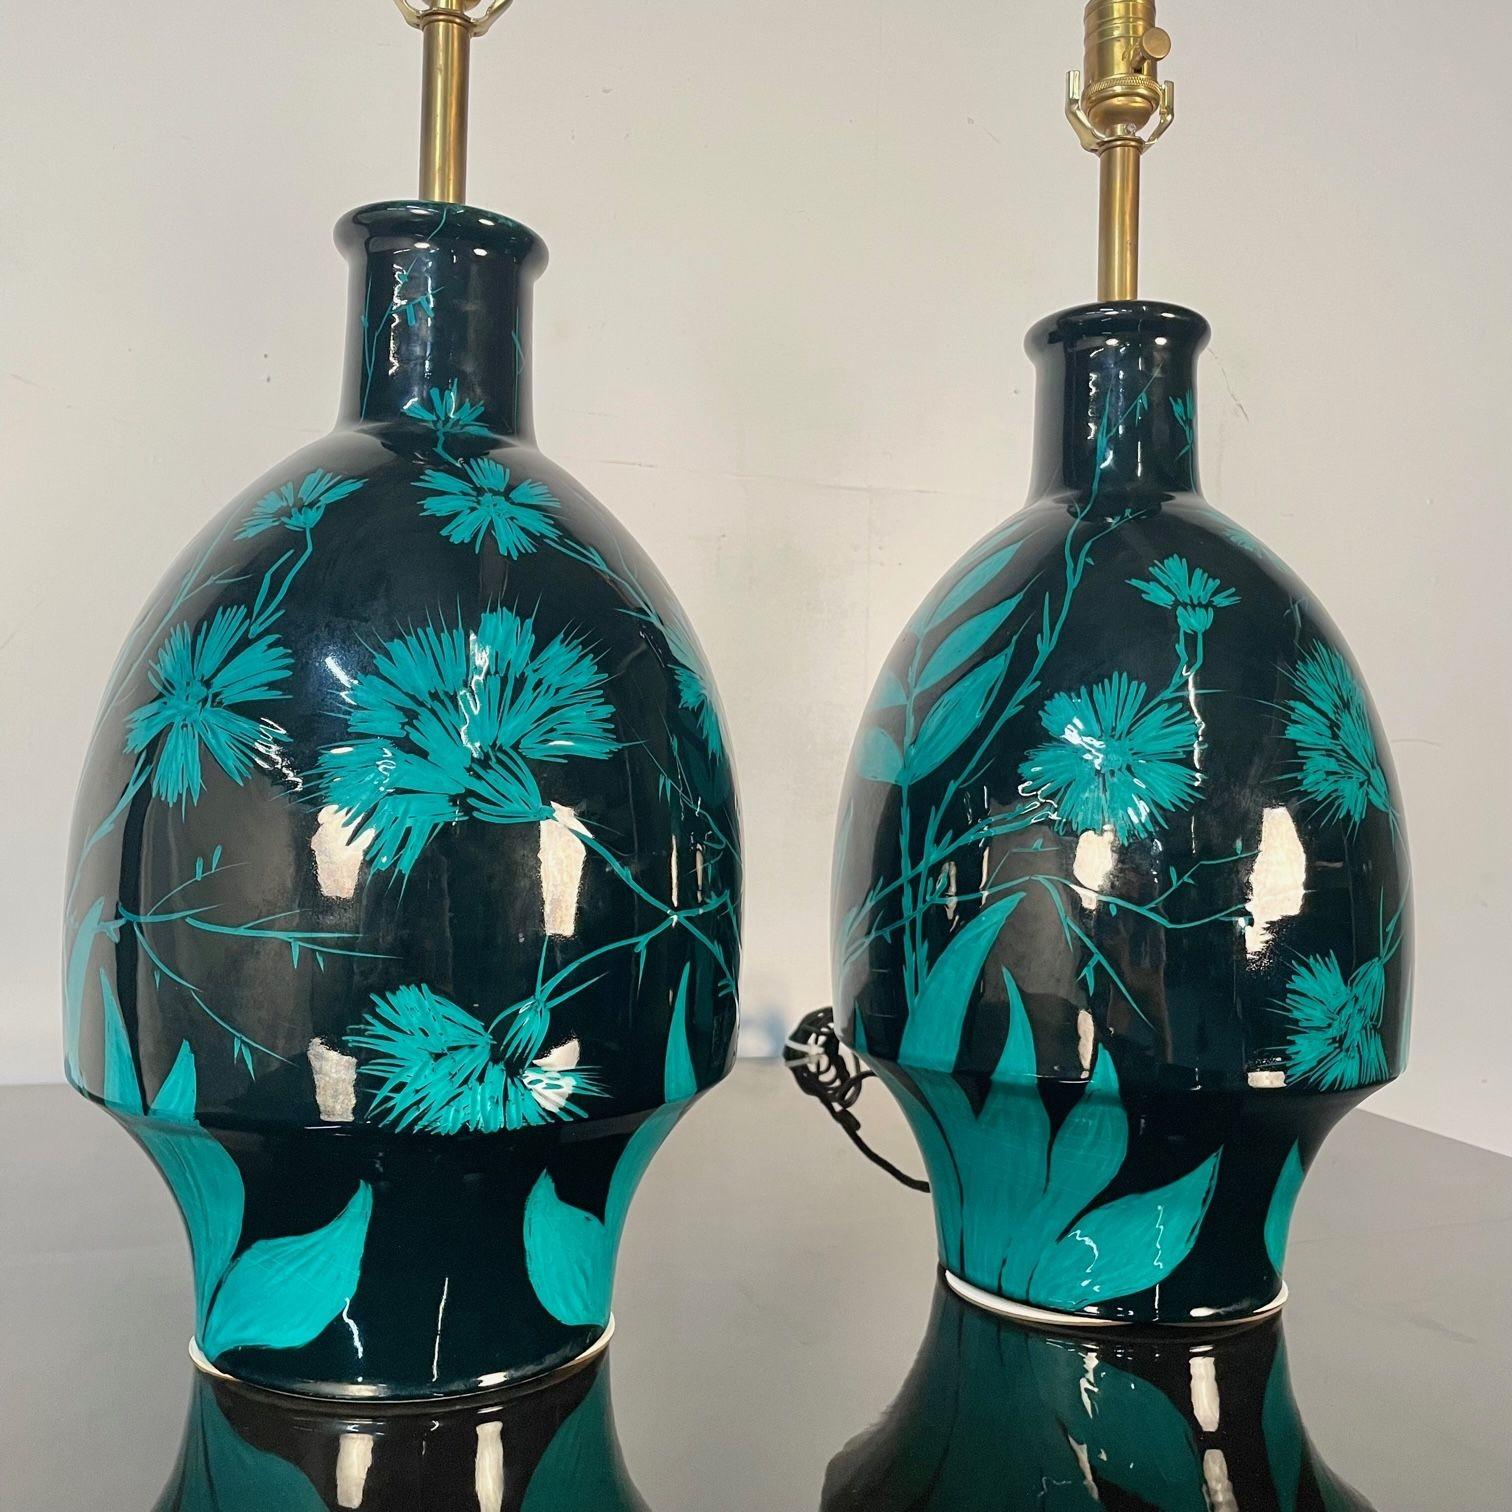 Pair of Mid-Century Modern Ceramic Floral Motif Table Lamps, Green and Blue For Sale 3